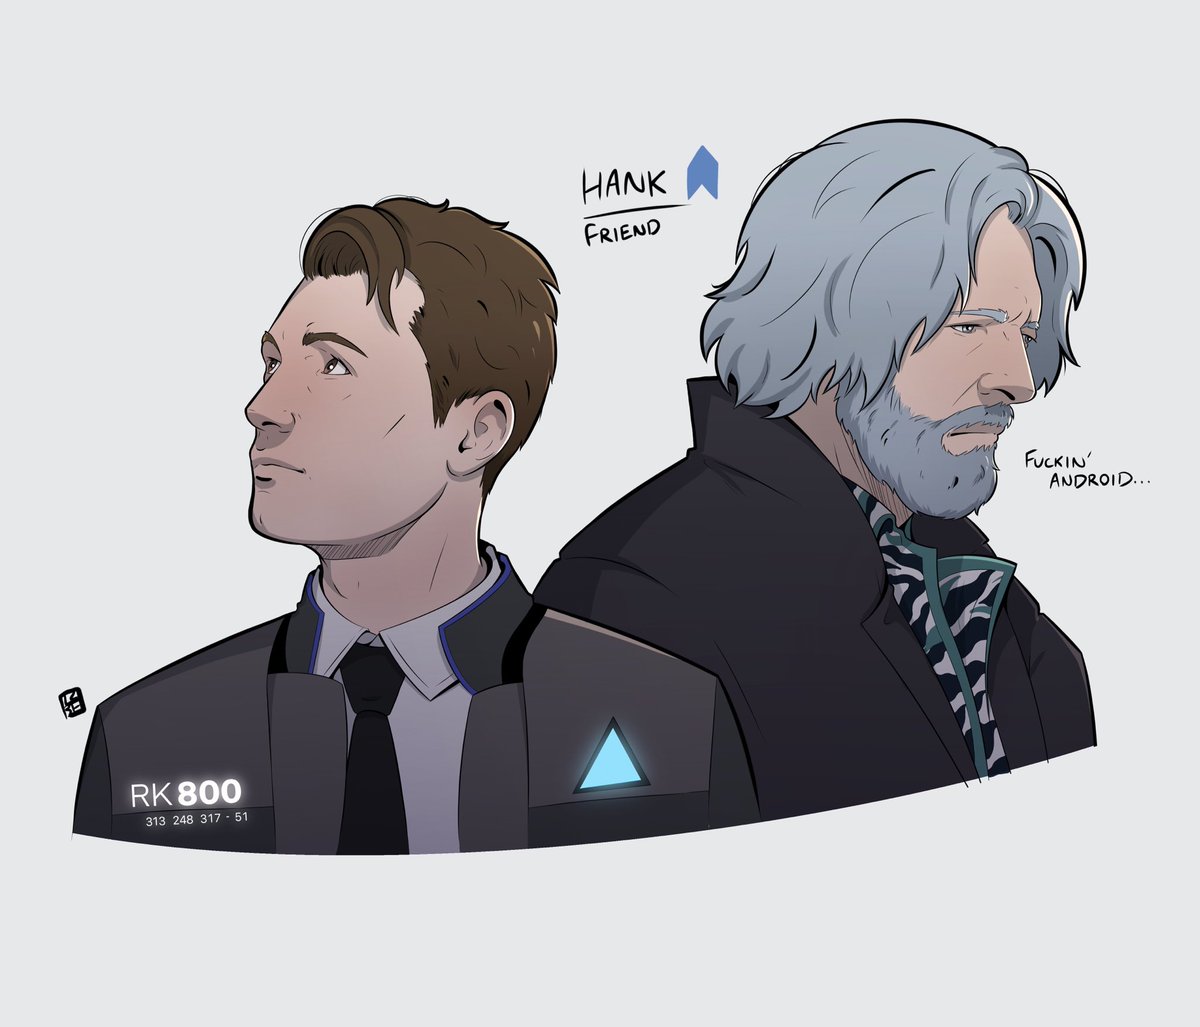 Lil doodle of Hank and Connor.

Hank hating on Connor and then his friendship going up is a mood lmao

#DBH #dbhconnor #dbhhank #DetroitBecomeHuman #fanart #dbhfanart #digitalart